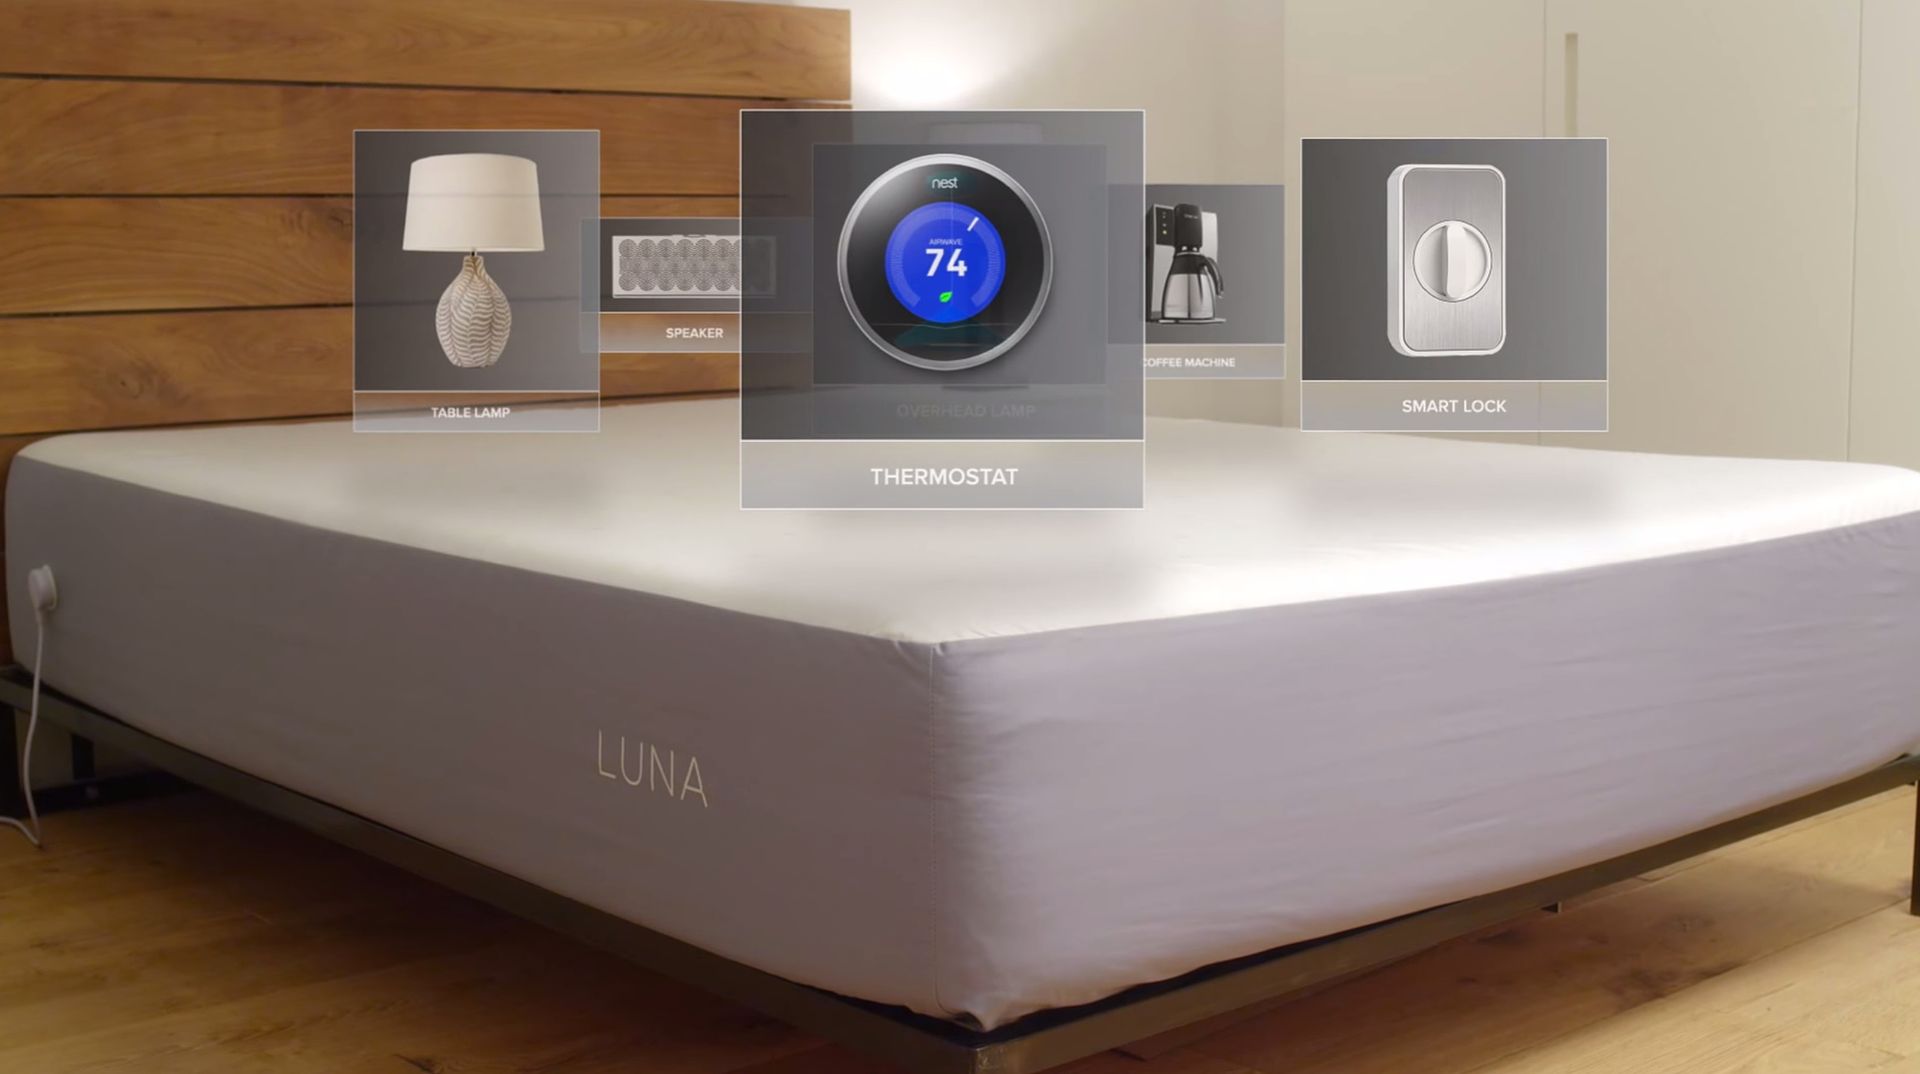 Luna Mattress Smart Cover communicates with your smart home to do more than track sleep